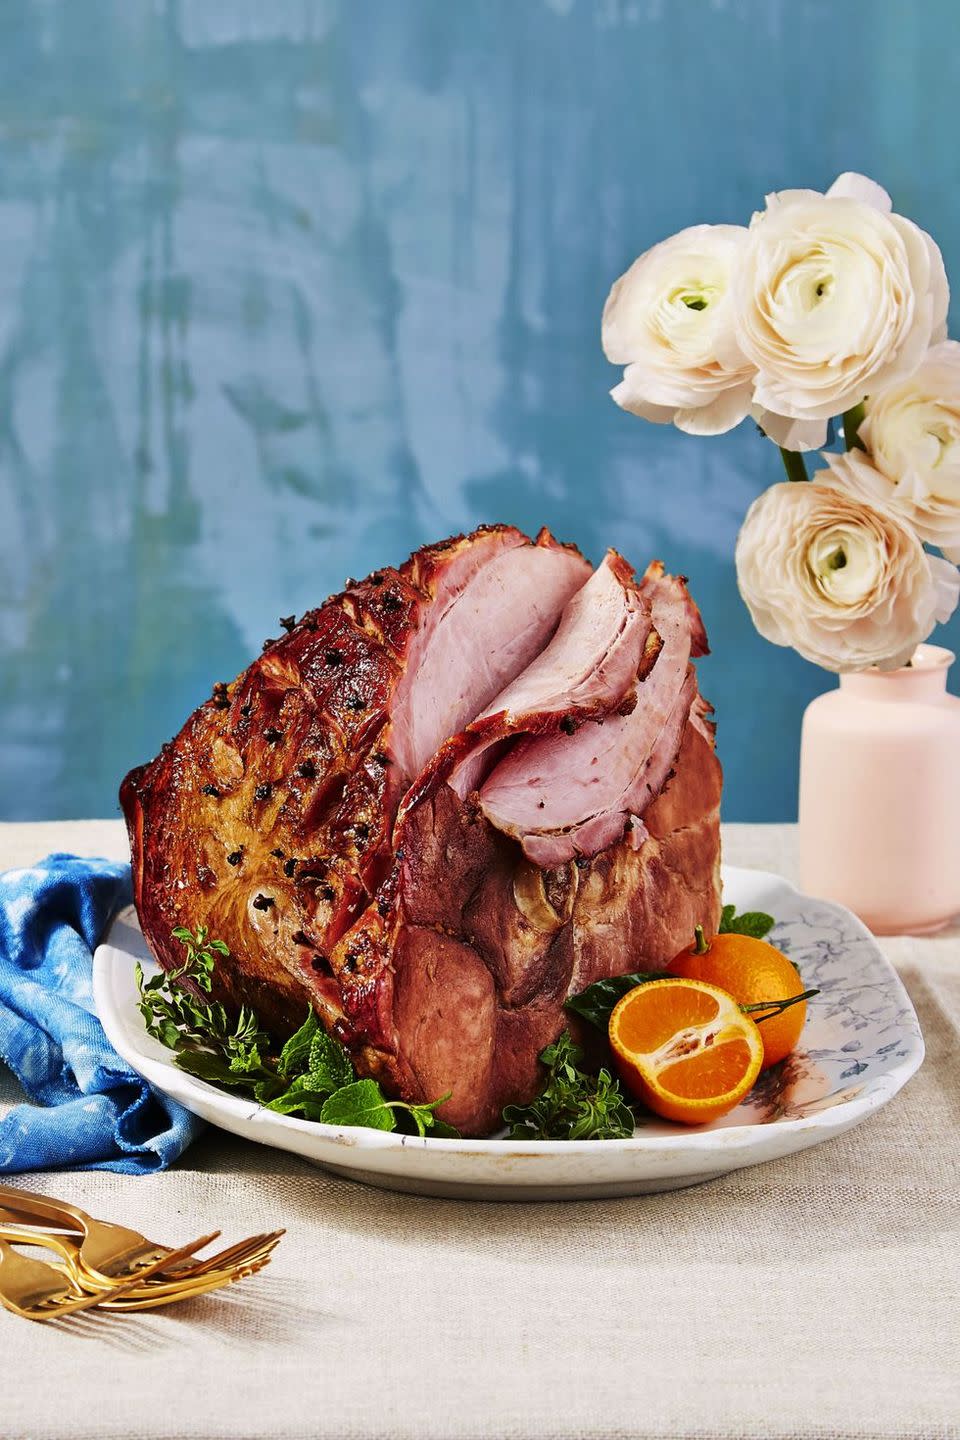 <p>We love the way this glazed ham looks and the fun ingredients it takes to cook. Glaze your ham with (yes!) root beer and serve this main with zero fear. I really like this <a href="https://www.goodhousekeeping.com/holidays/christmas-ideas/g4019/best-christmas-hams/" rel="nofollow noopener" target="_blank" data-ylk="slk:Christmas ham" class="link ">Christmas ham</a>, but not as much as I like yams. </p><p><em><a href="https://www.goodhousekeeping.com/food-recipes/a37453/baked-ham-with-root-beer-glaze-recipe/" rel="nofollow noopener" target="_blank" data-ylk="slk:Get the recipe for Baked Ham with Root Beer Glaze »" class="link ">Get the recipe for Baked Ham with Root Beer Glaze »</a></em></p>